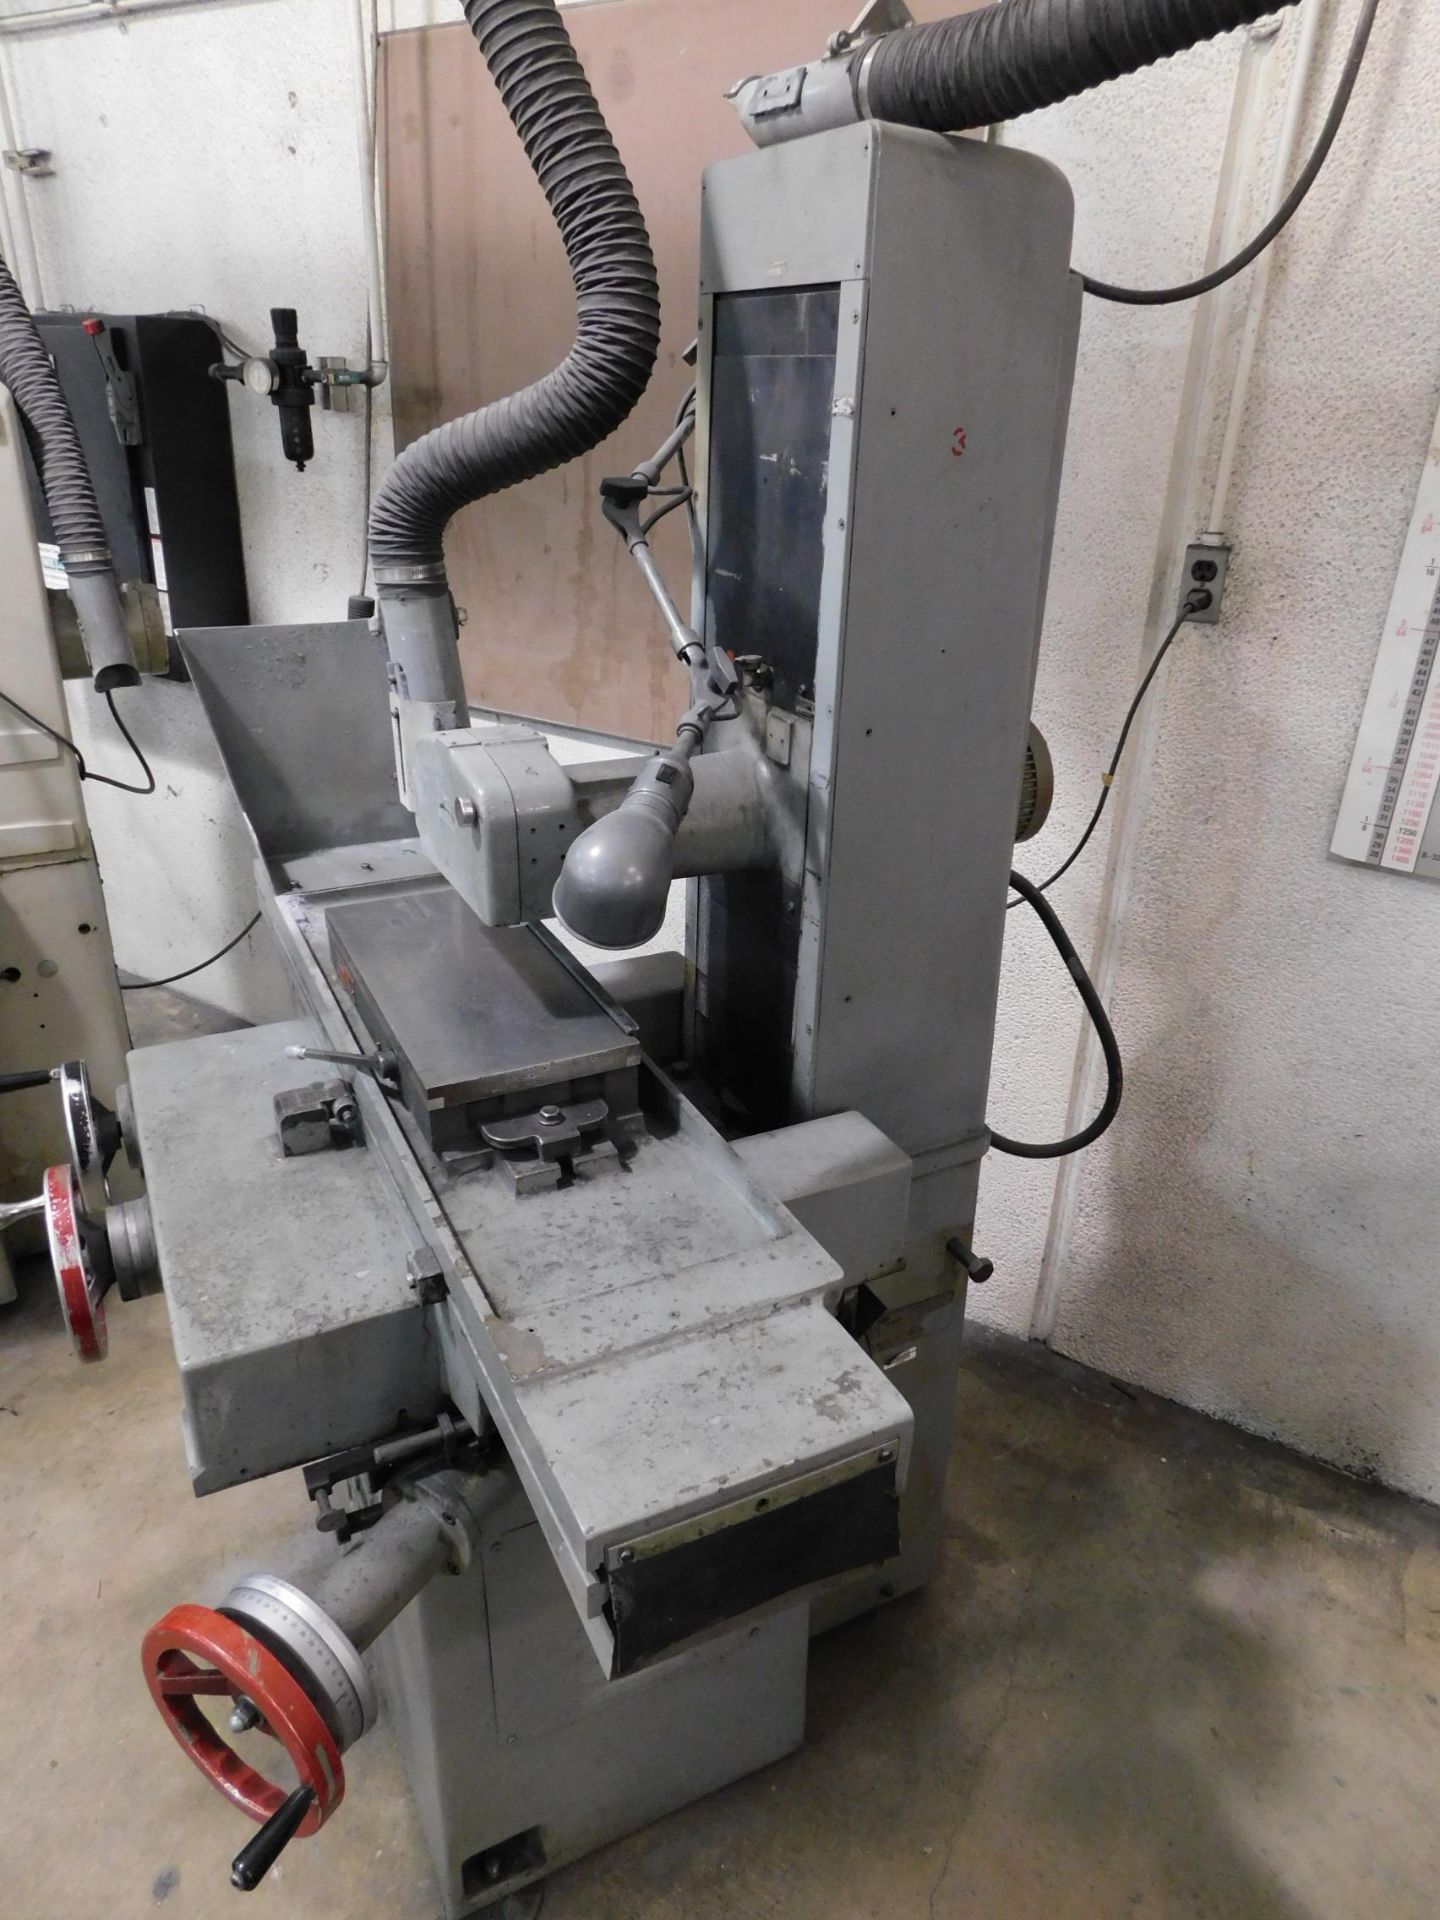 Mitsui Model 2-50MH 8" x 18" Hand-Feed Surface Grinder, SN 84124675, Walker Ceramax 8' x 18" - Image 9 of 10